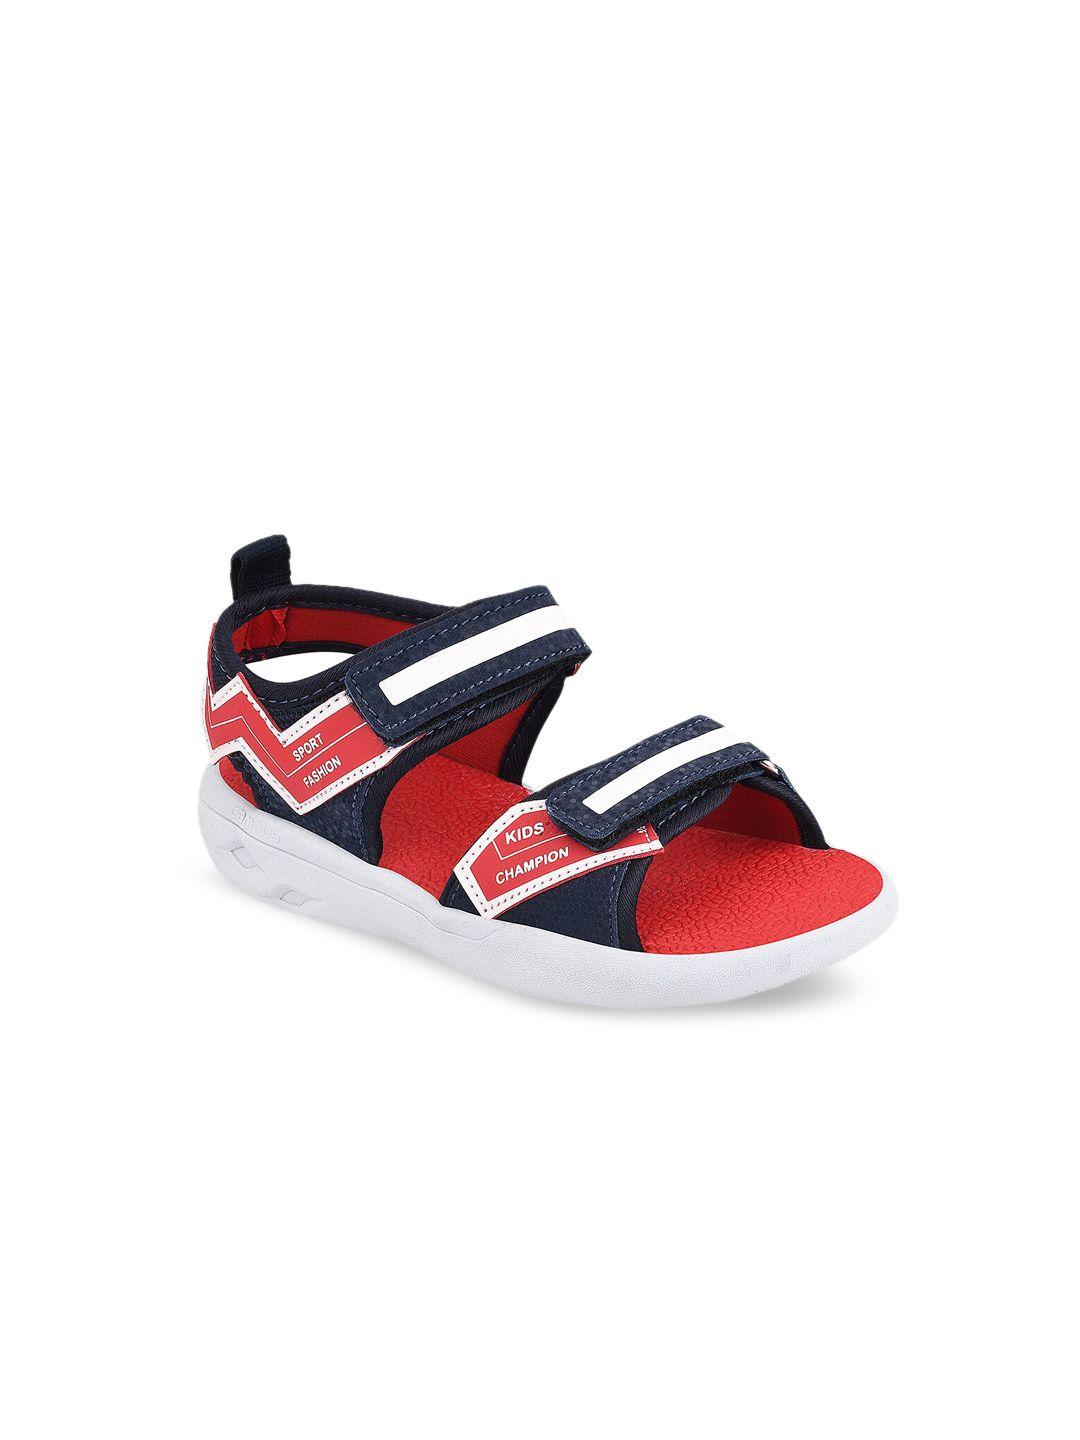 campus-kids-navy-blue-&-red-solid-sports-sandals